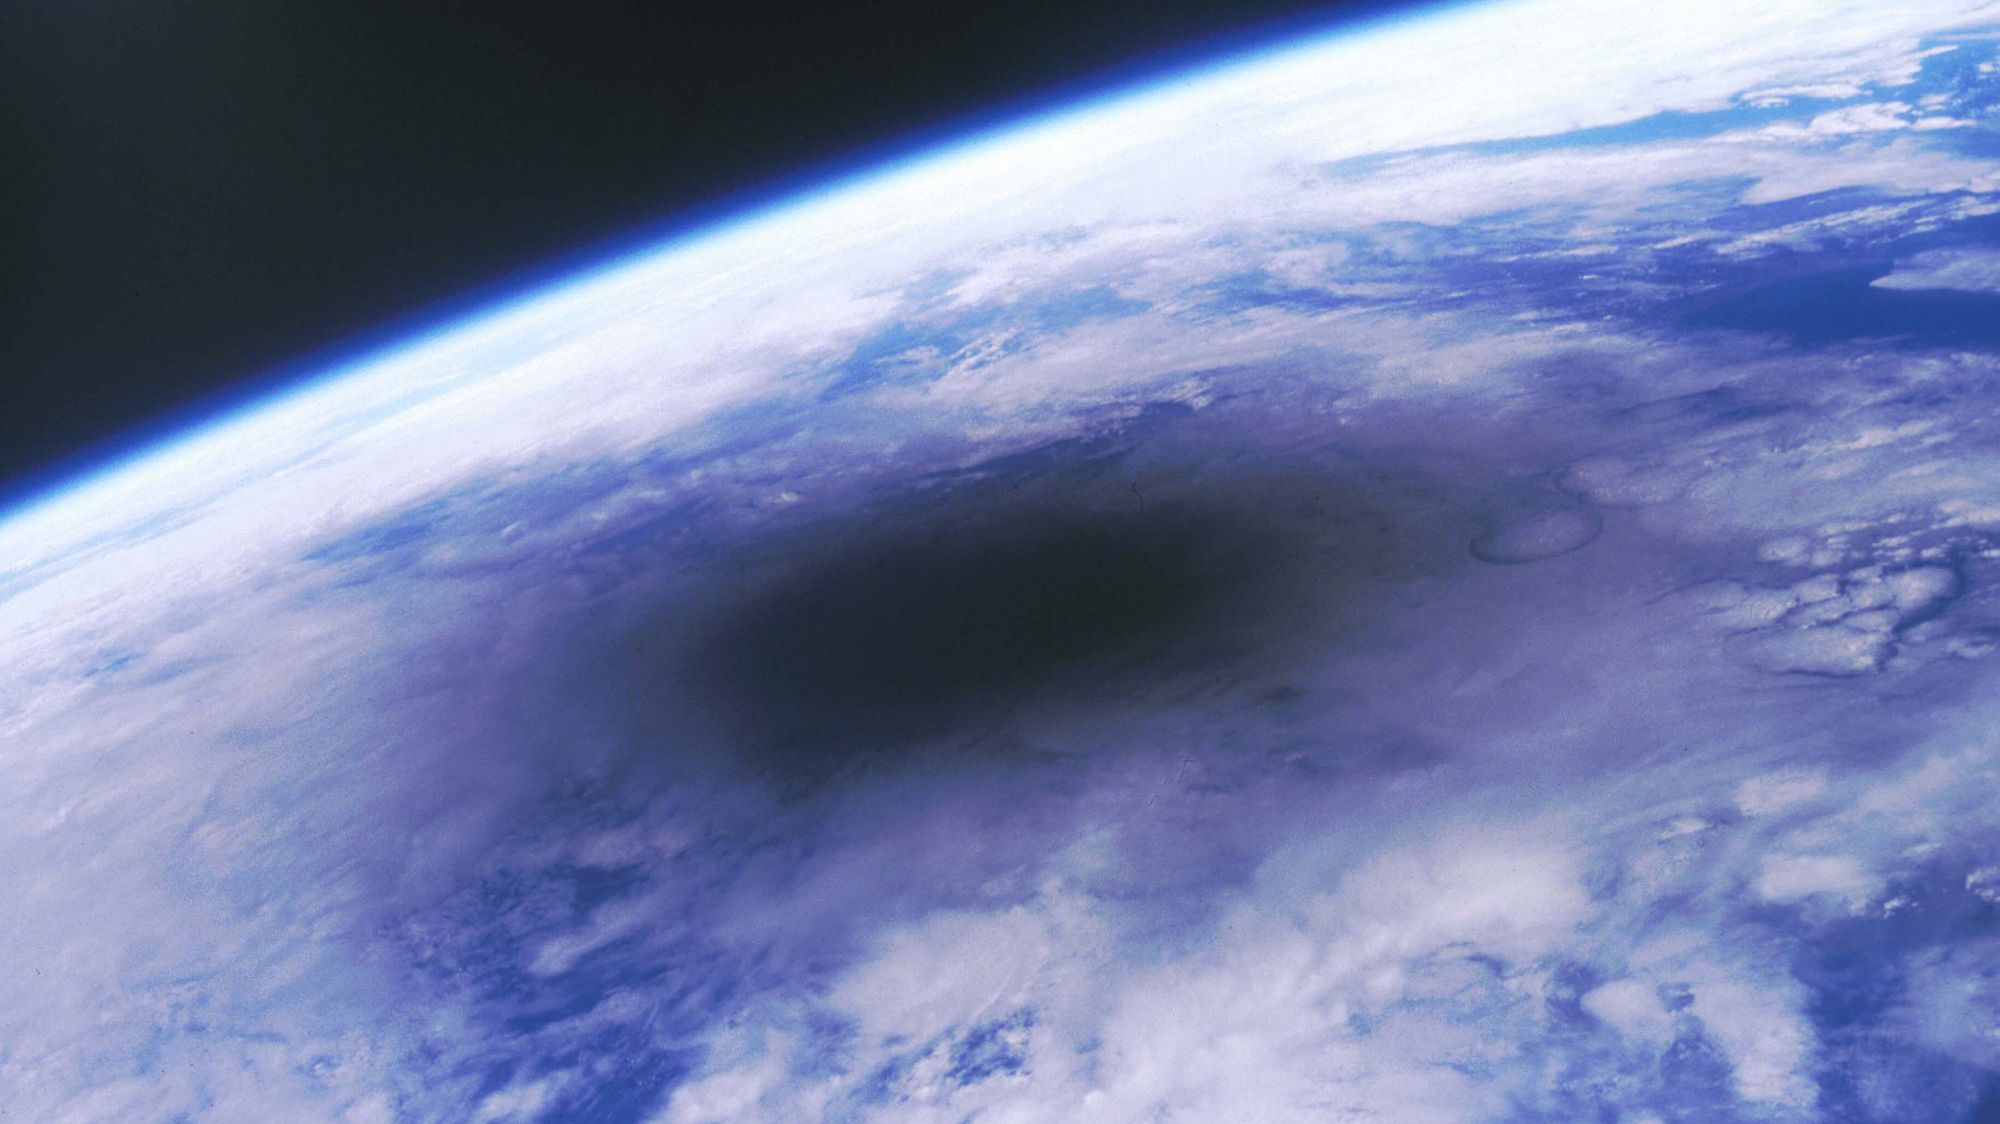 A partial view of the curve of Earth from space during an eclipse